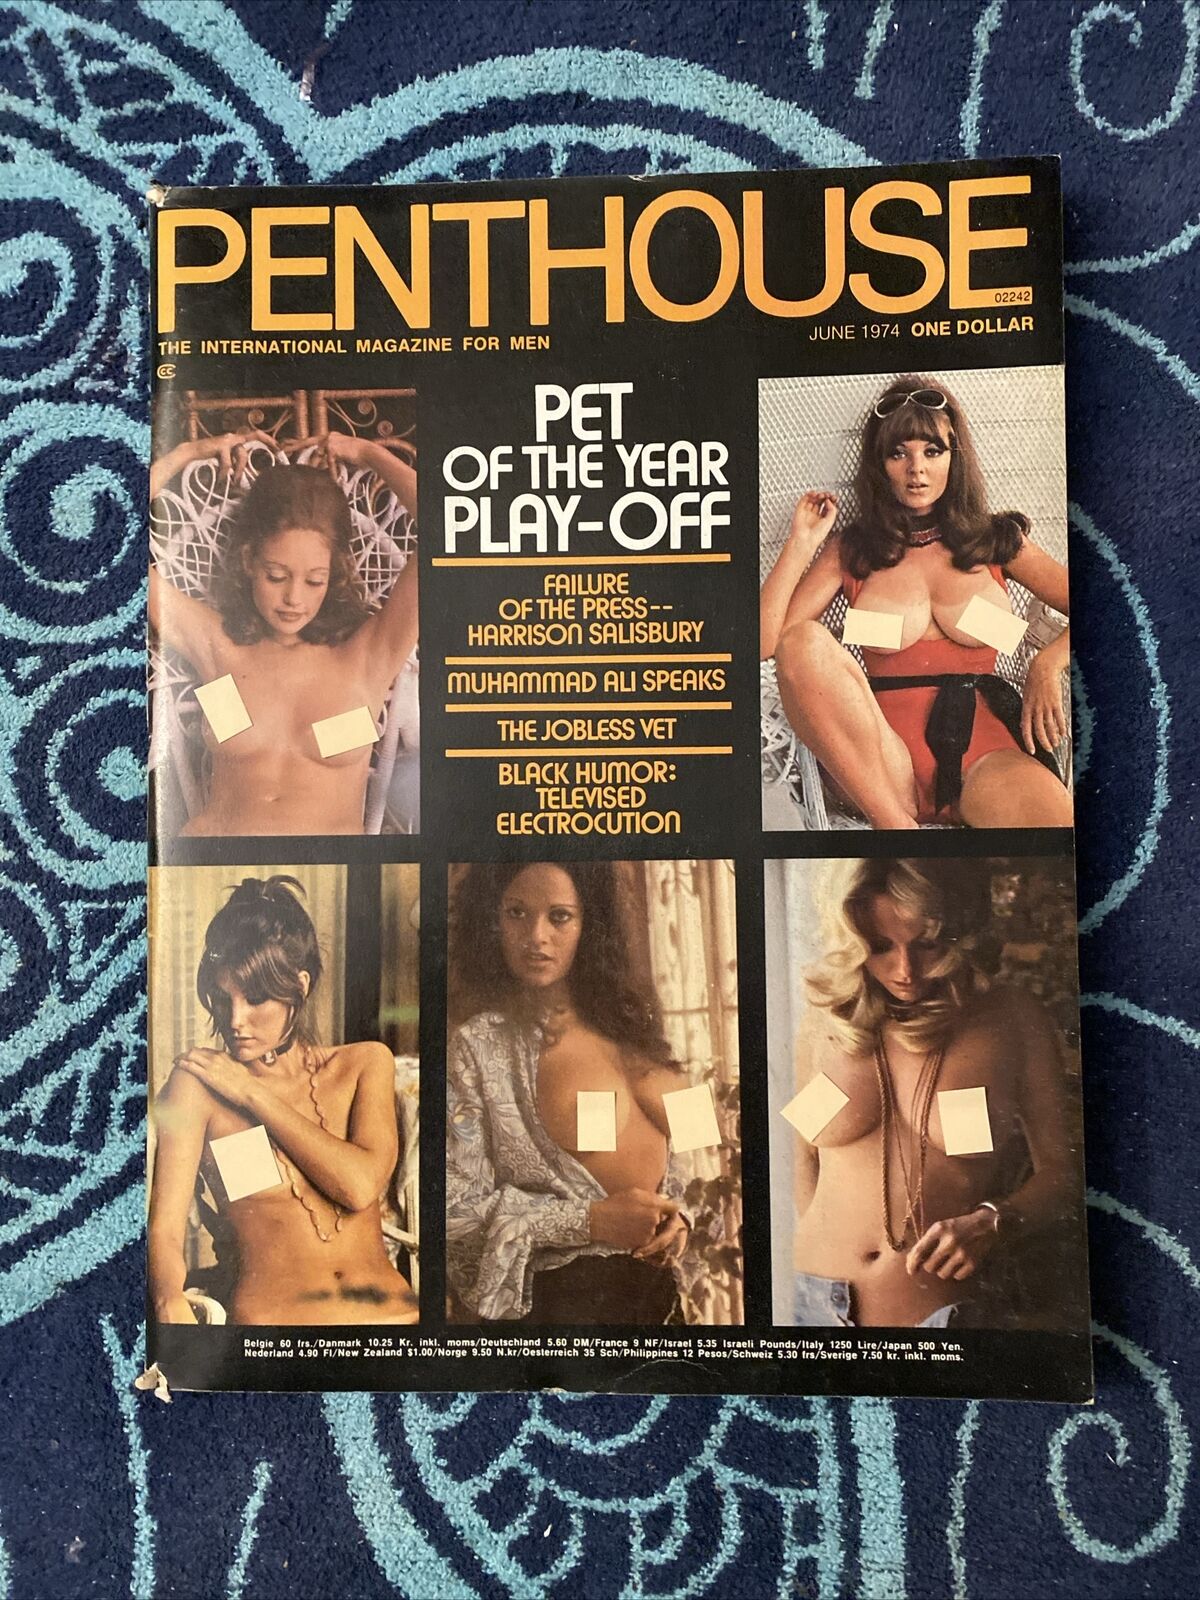 VTG‼ Penthouse June 1974 Vol 5 #10 Alicia Justin Pet of the Year Play-Off •